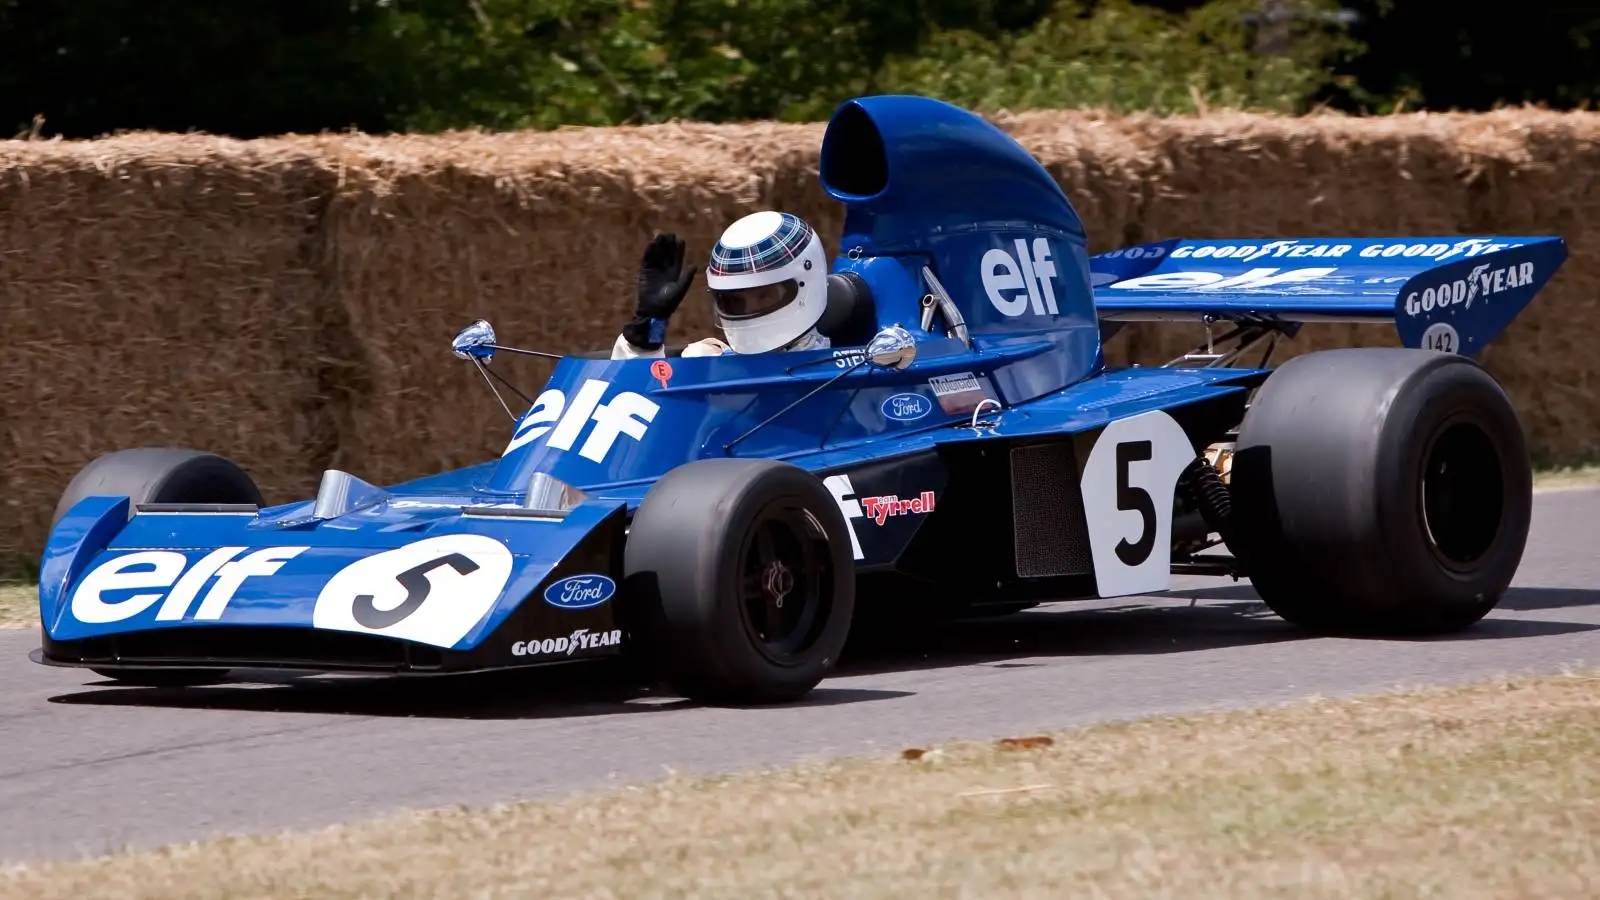 The 1973 Tyrrell 006 driven at the Goodwood Festival of Speed.